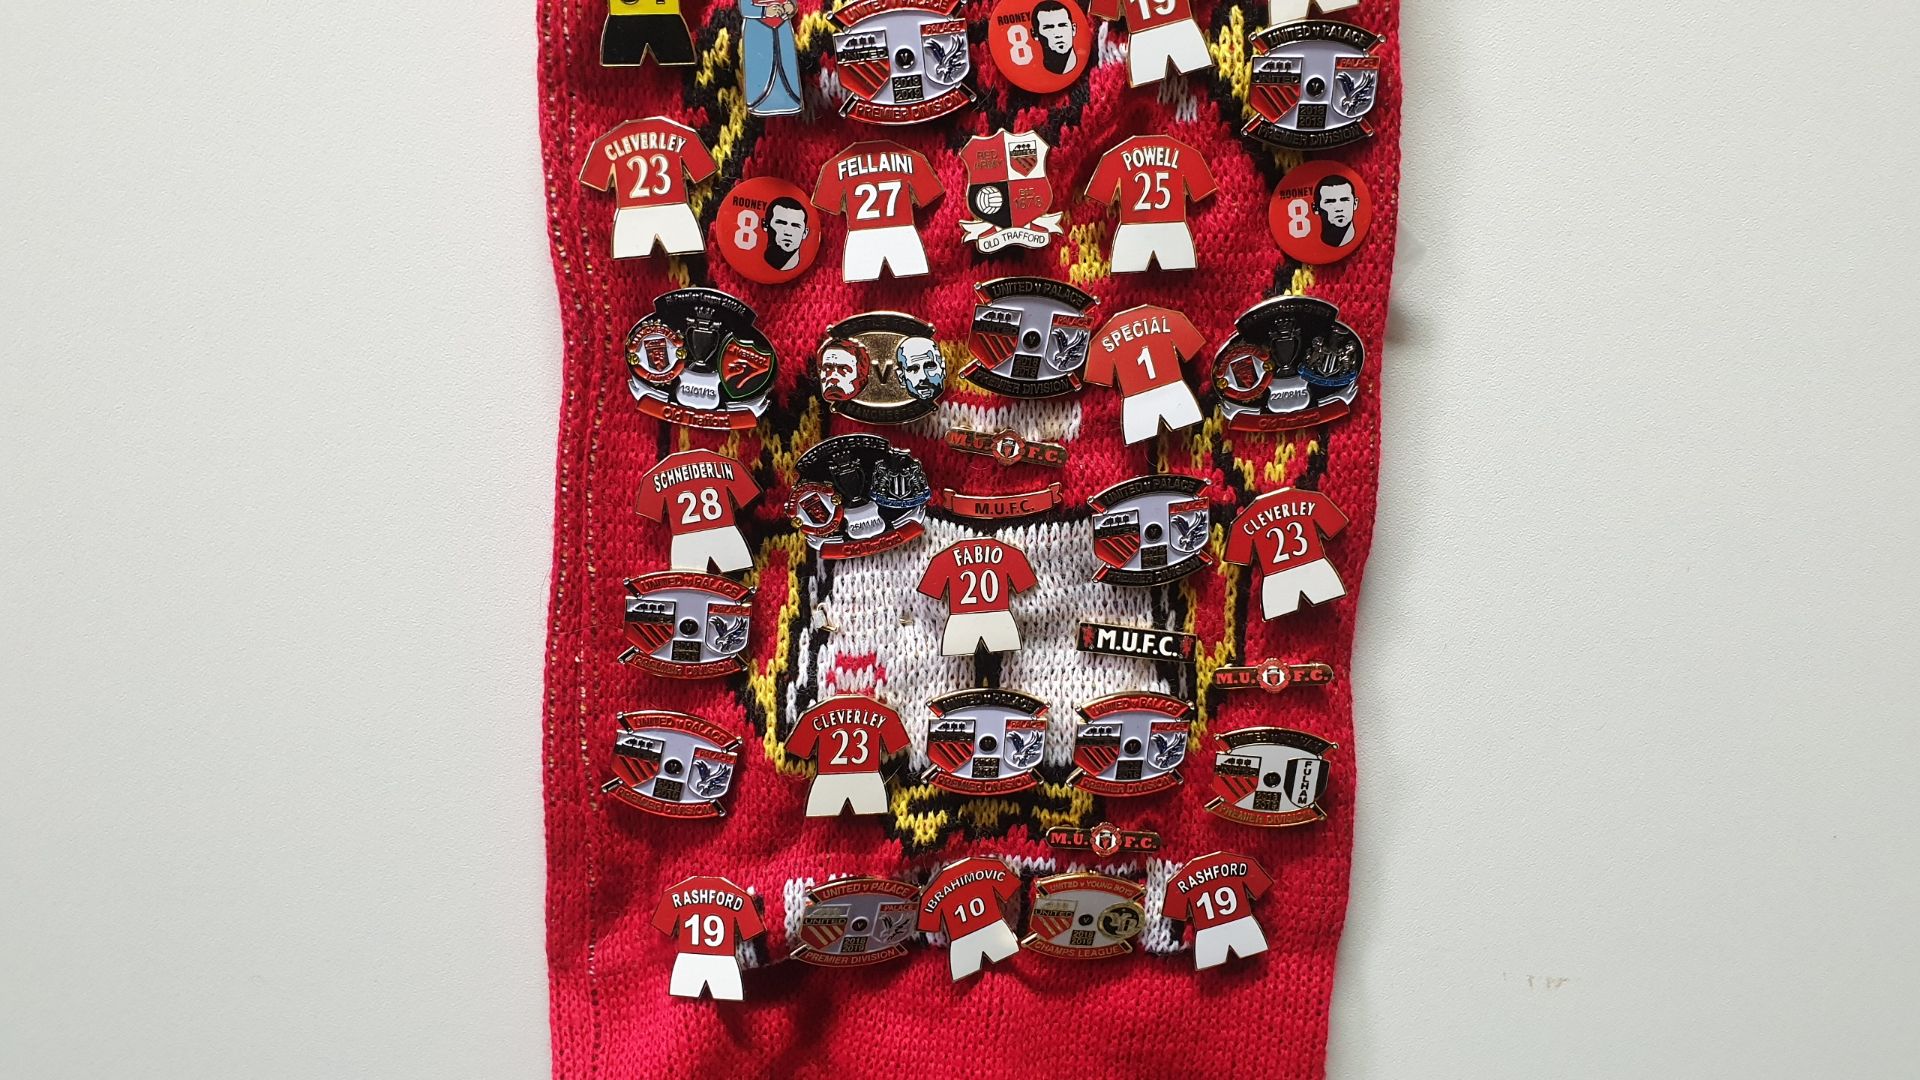 MANCHESTER UNITED SCARF CONTAINING APPROX 200 X PIN BADGES IE MUFC, BATTLE FOR MANCHESTER, ROONEY, - Image 8 of 8